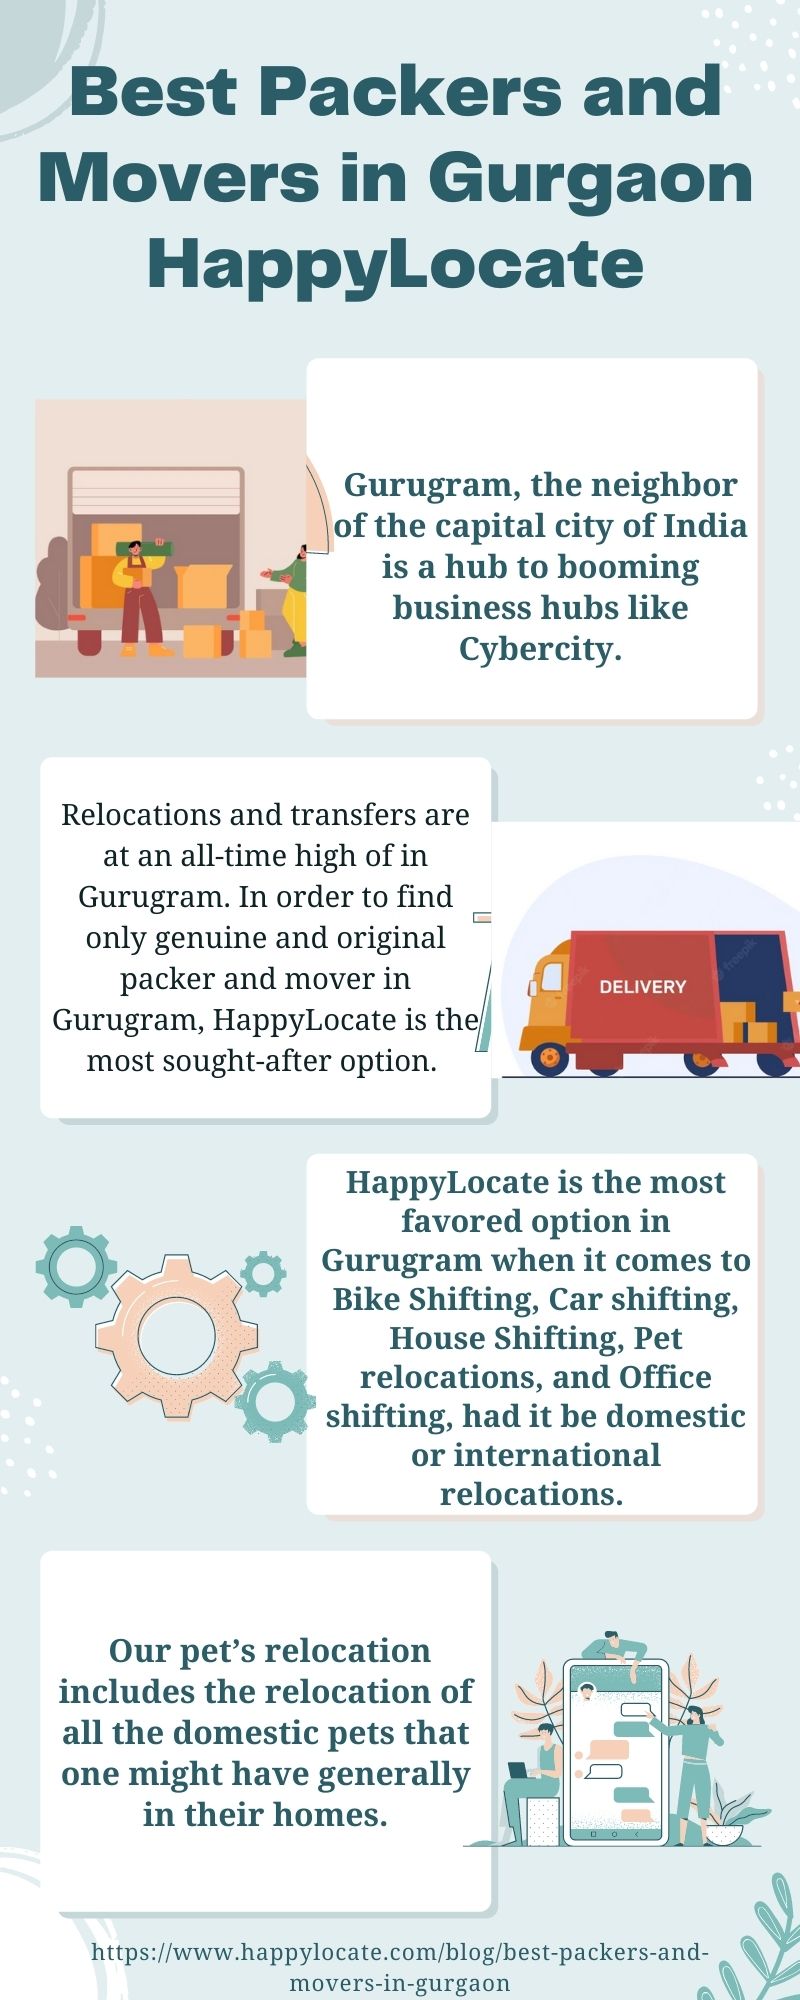 Best Packers and
Movers in Gurgaon
HappylLocate

. Gurugram, the neighbor
(of the capital city of India
~ is a hub to booming
1 business hubs like
Cybercity.

Relocations and transfers are
at an all-time high of in
Gurugram. In order to find
only genuine and original
packer and mover in |
Gurugram, HappyLocate is the
most sought-after option.

 

HappyLocate is the most
favored option in
O Gurugram when it comes to
;

 

Bike Shifting, Car shifting,
_ 5) House Shifting, Pet
GE ~L} relocations, and Office
I shifting, had it be domestic
or international
relocations.

7

Our pet’s relocation my
includes the relocation of |

    

NINA
A =v,

all the domestic pets that = —=% =

one might have generally al; Le
in their homes.
— Ase

 

move

 

-in-gurgaon